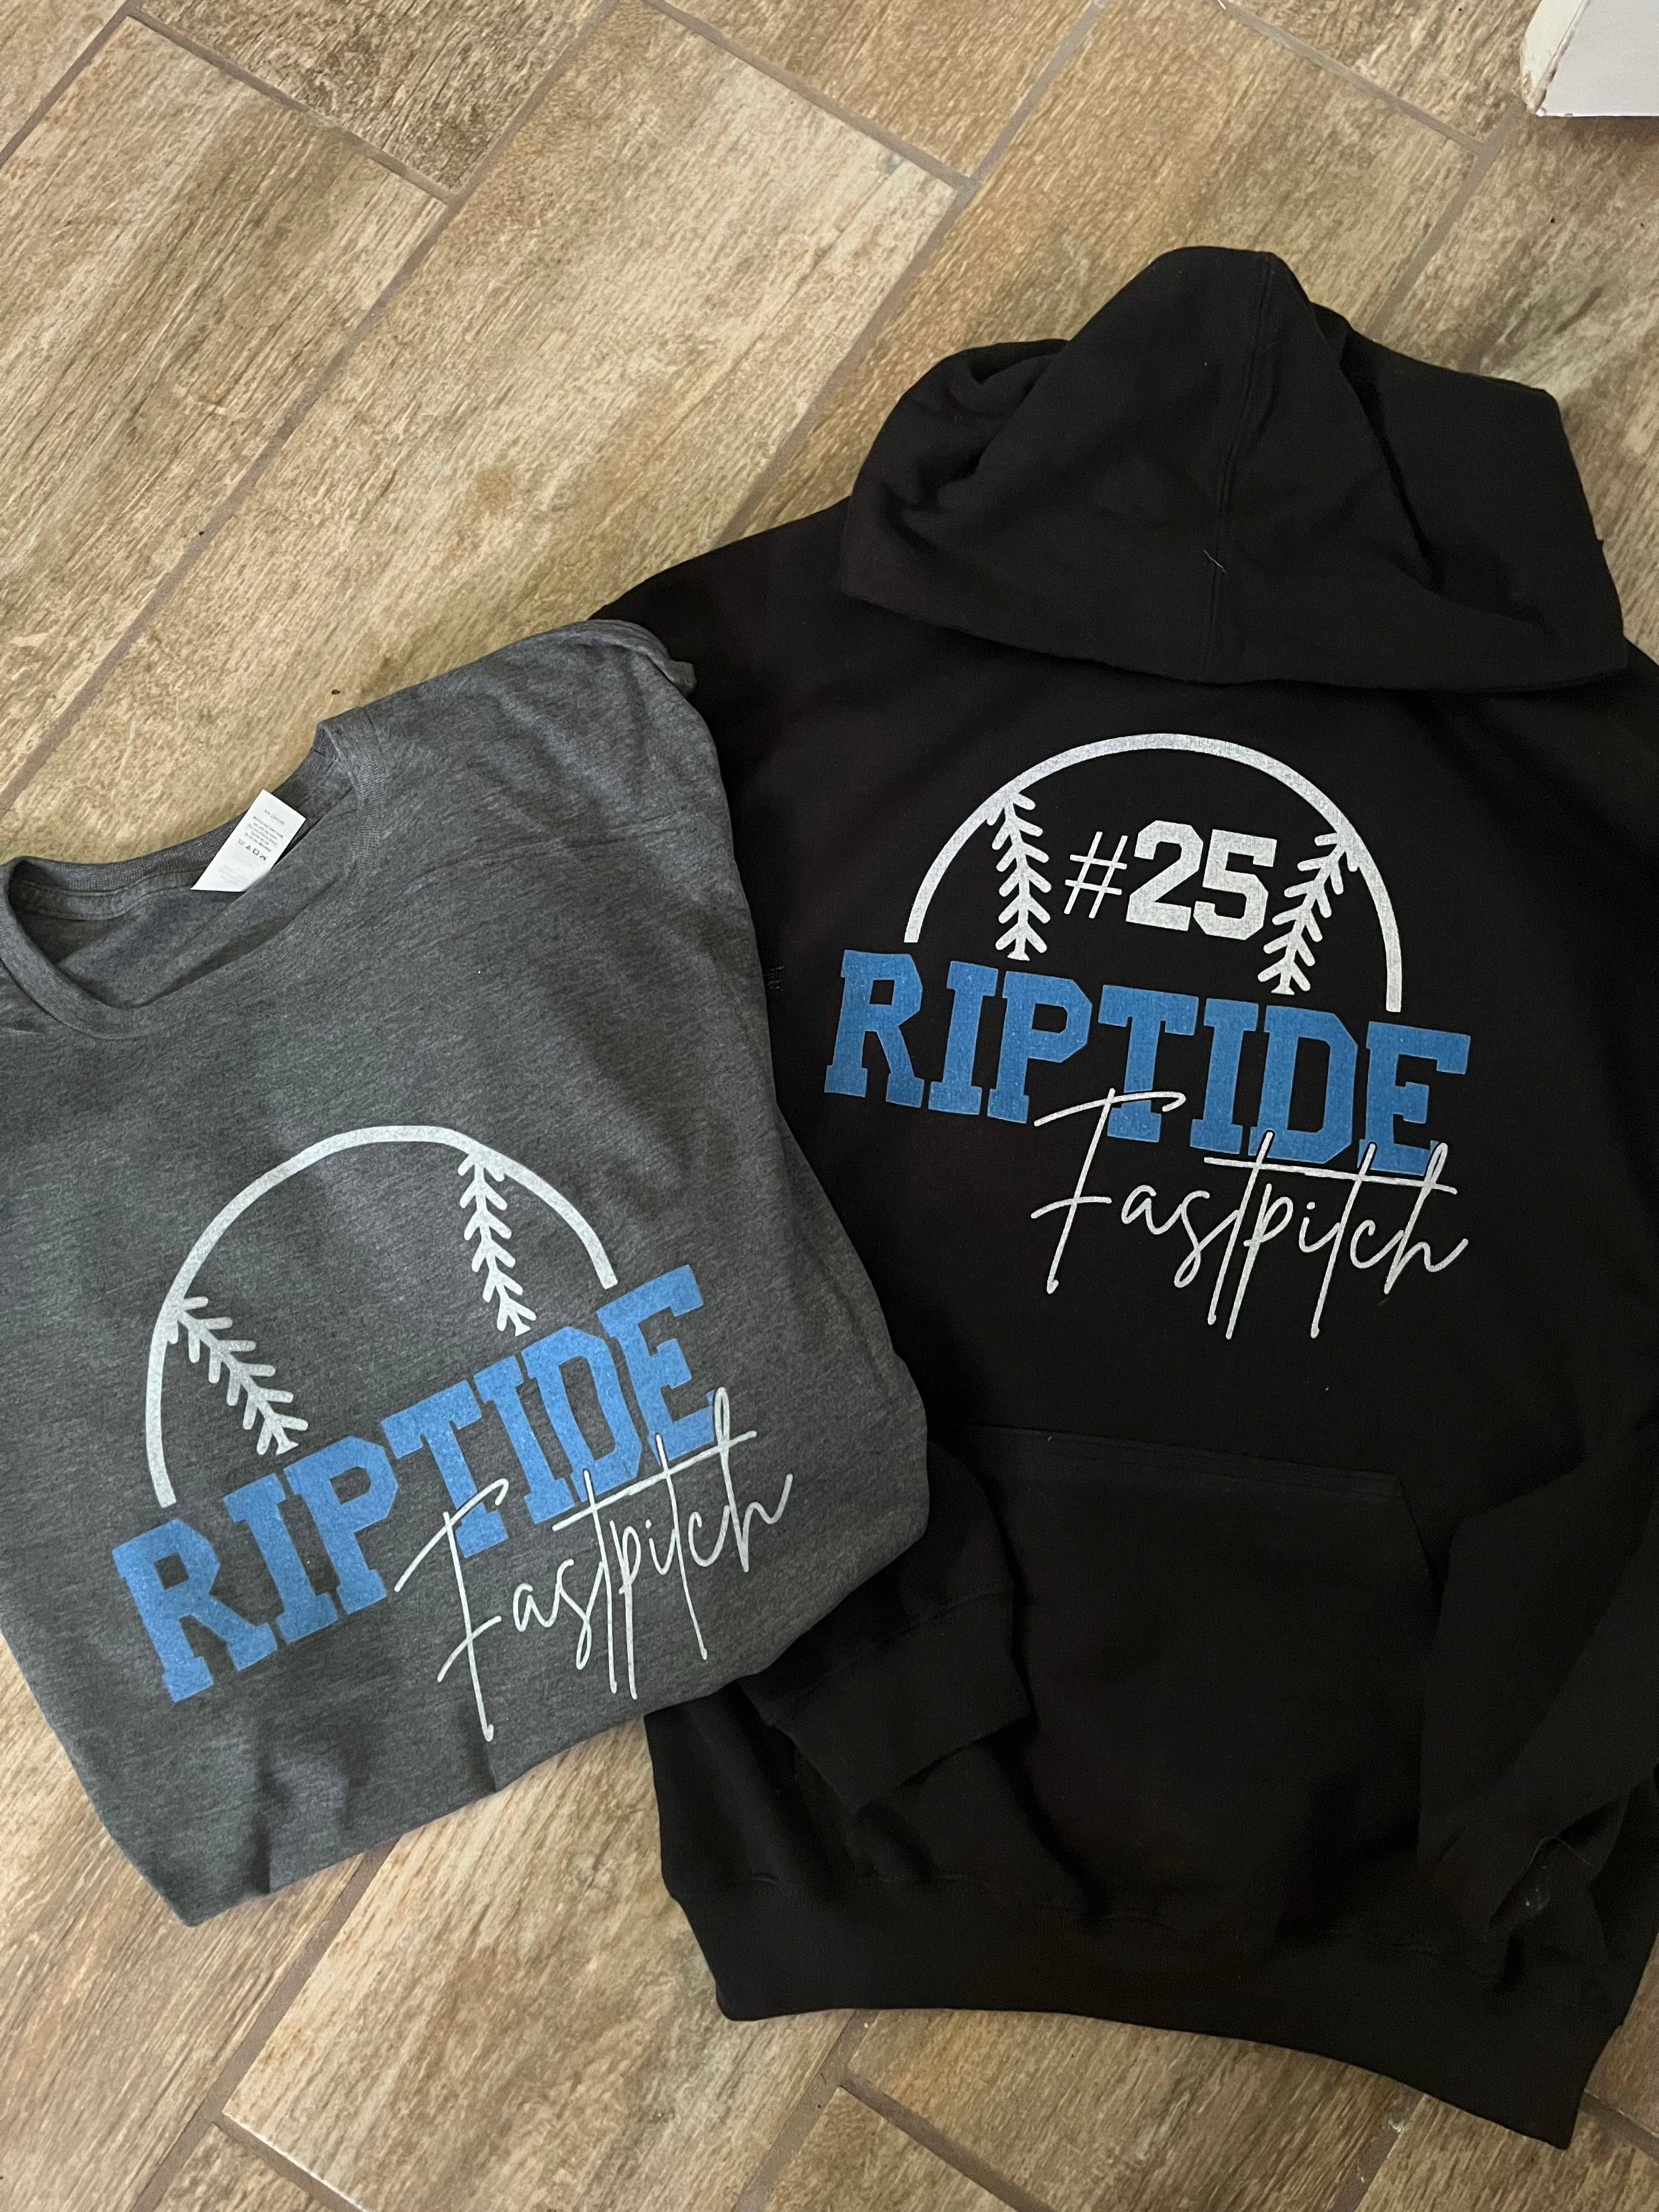 Riptide Fastpitch Simple